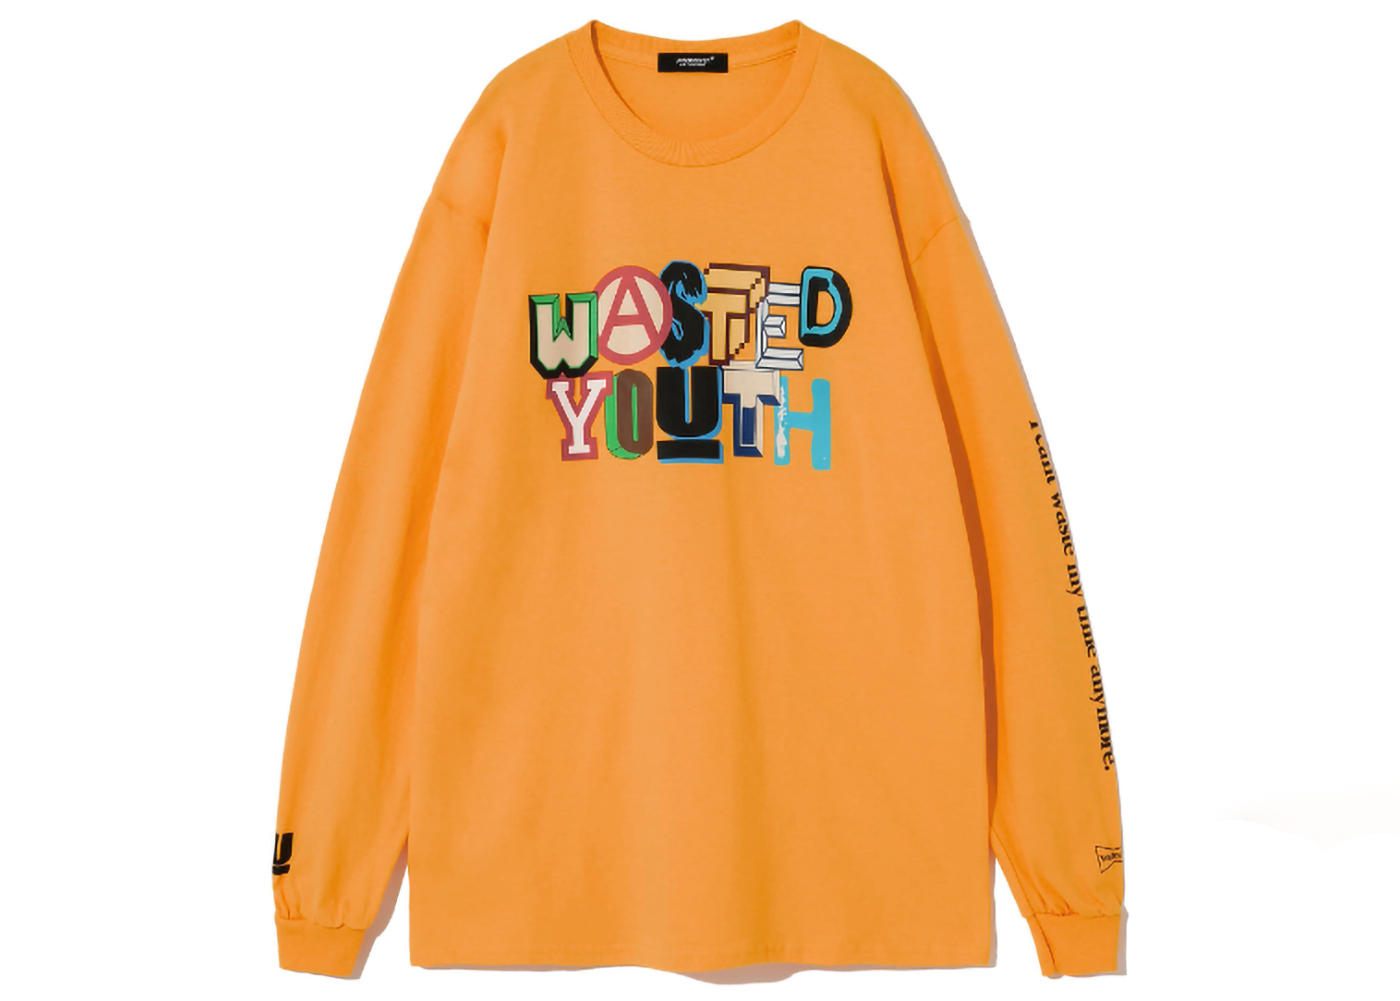 Undercover x Verdy Wasted Youth L/S T-Shirt Yellow